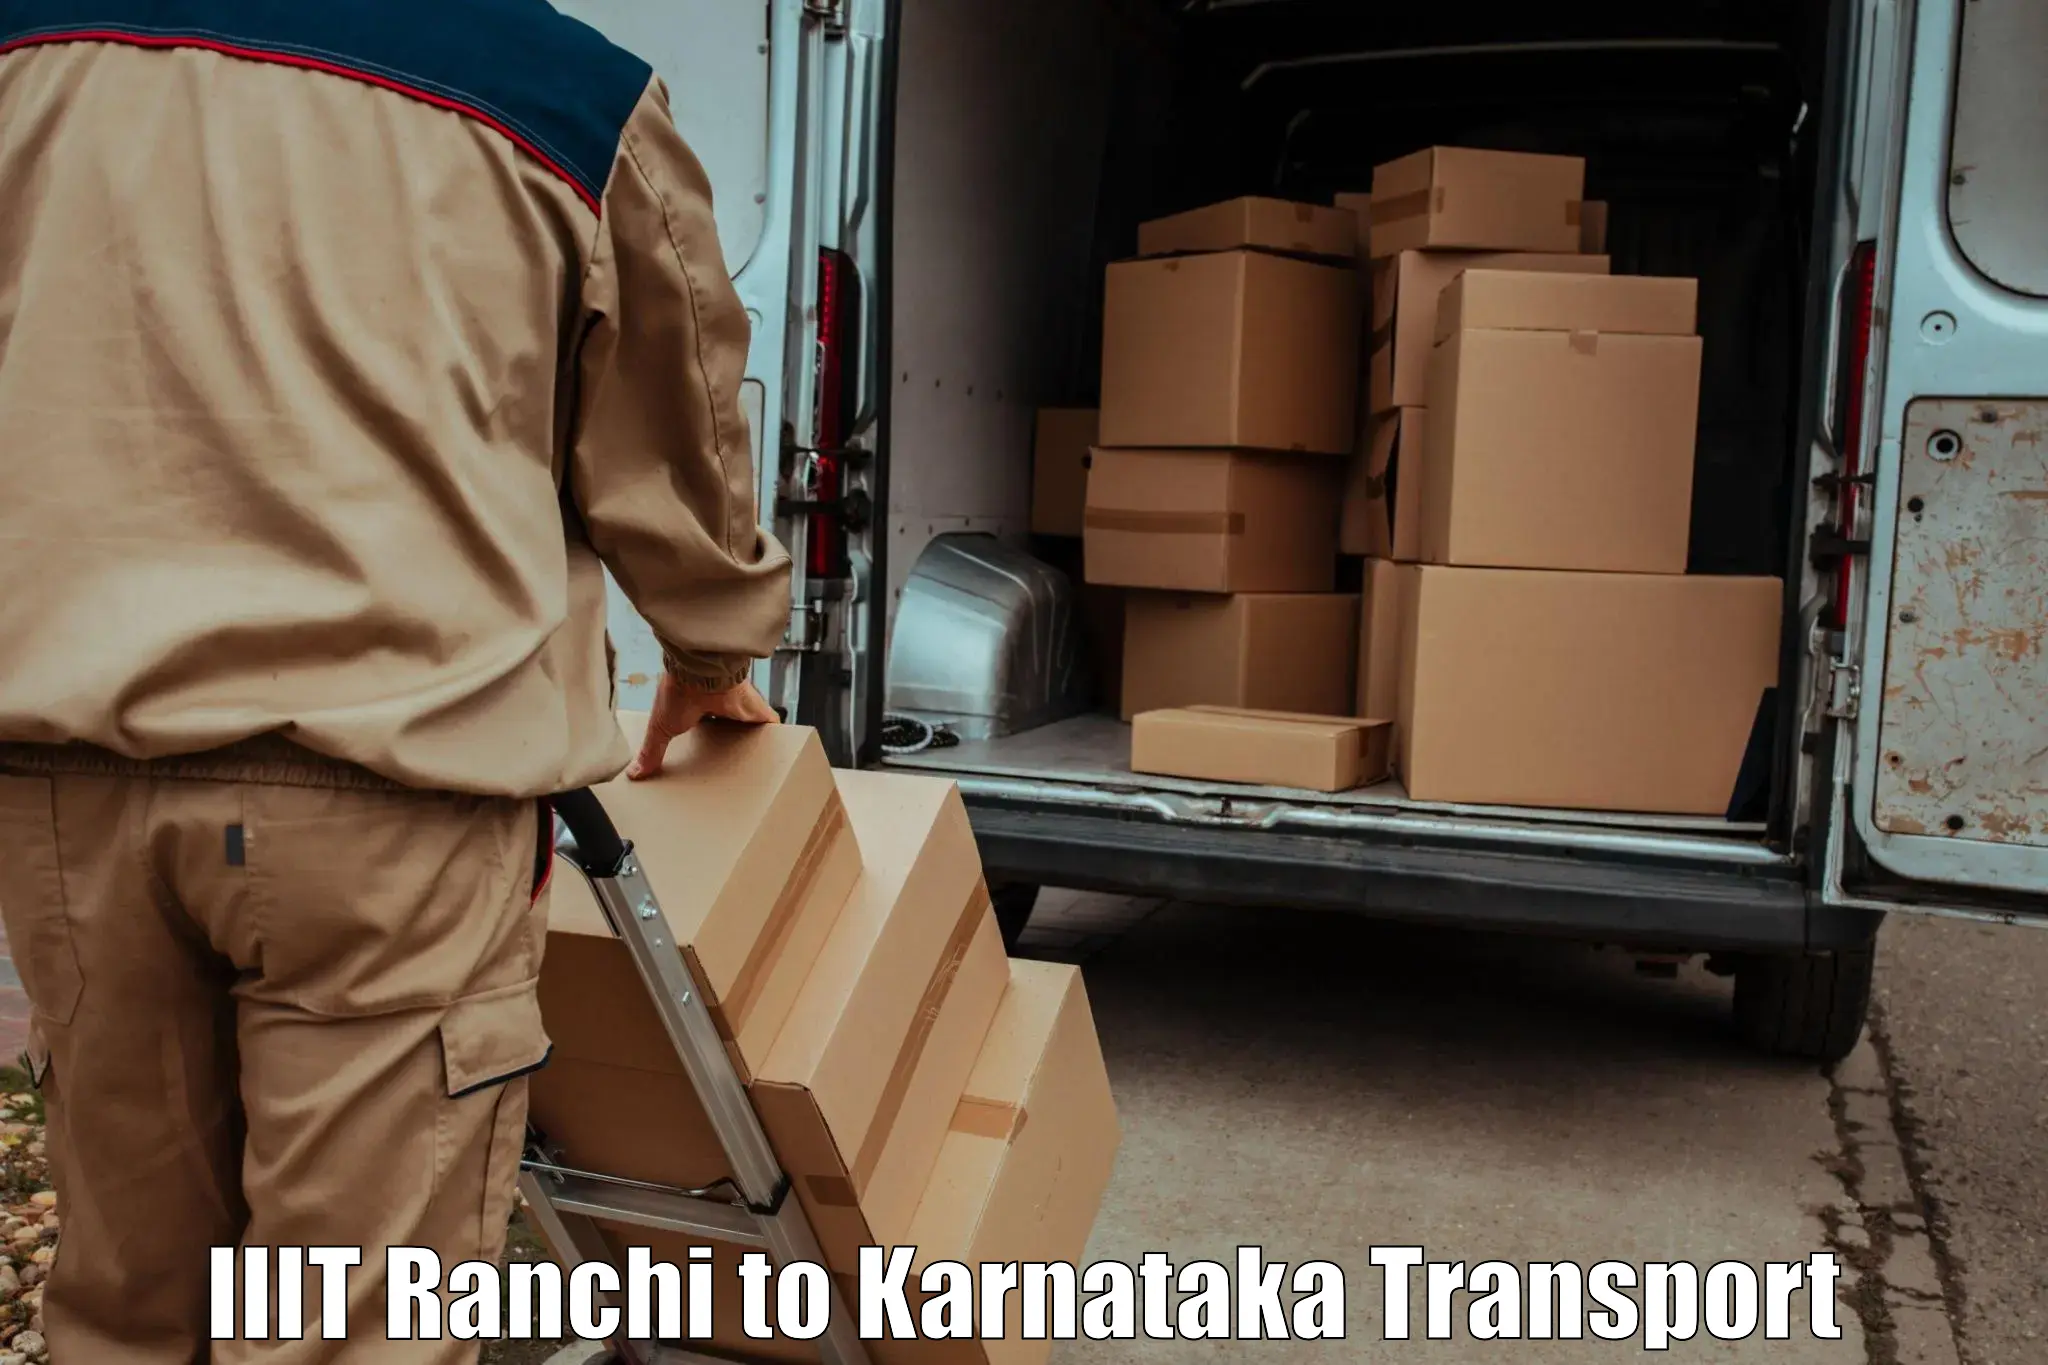 Lorry transport service IIIT Ranchi to Manipal